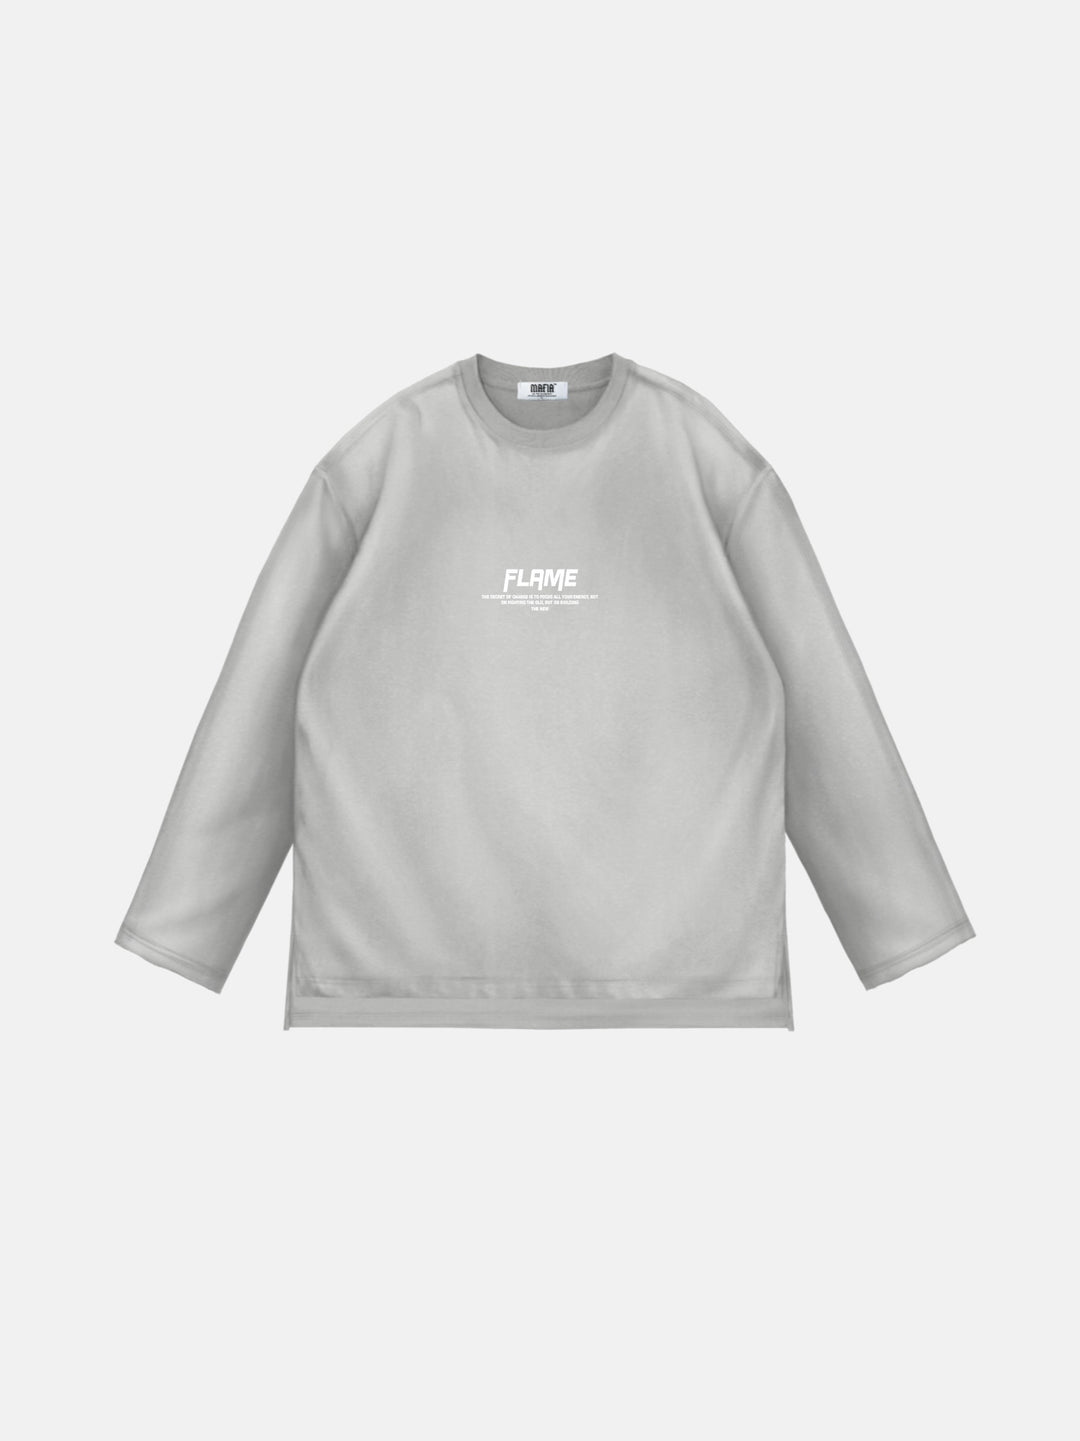 Oversize Flame Sweater - Grey